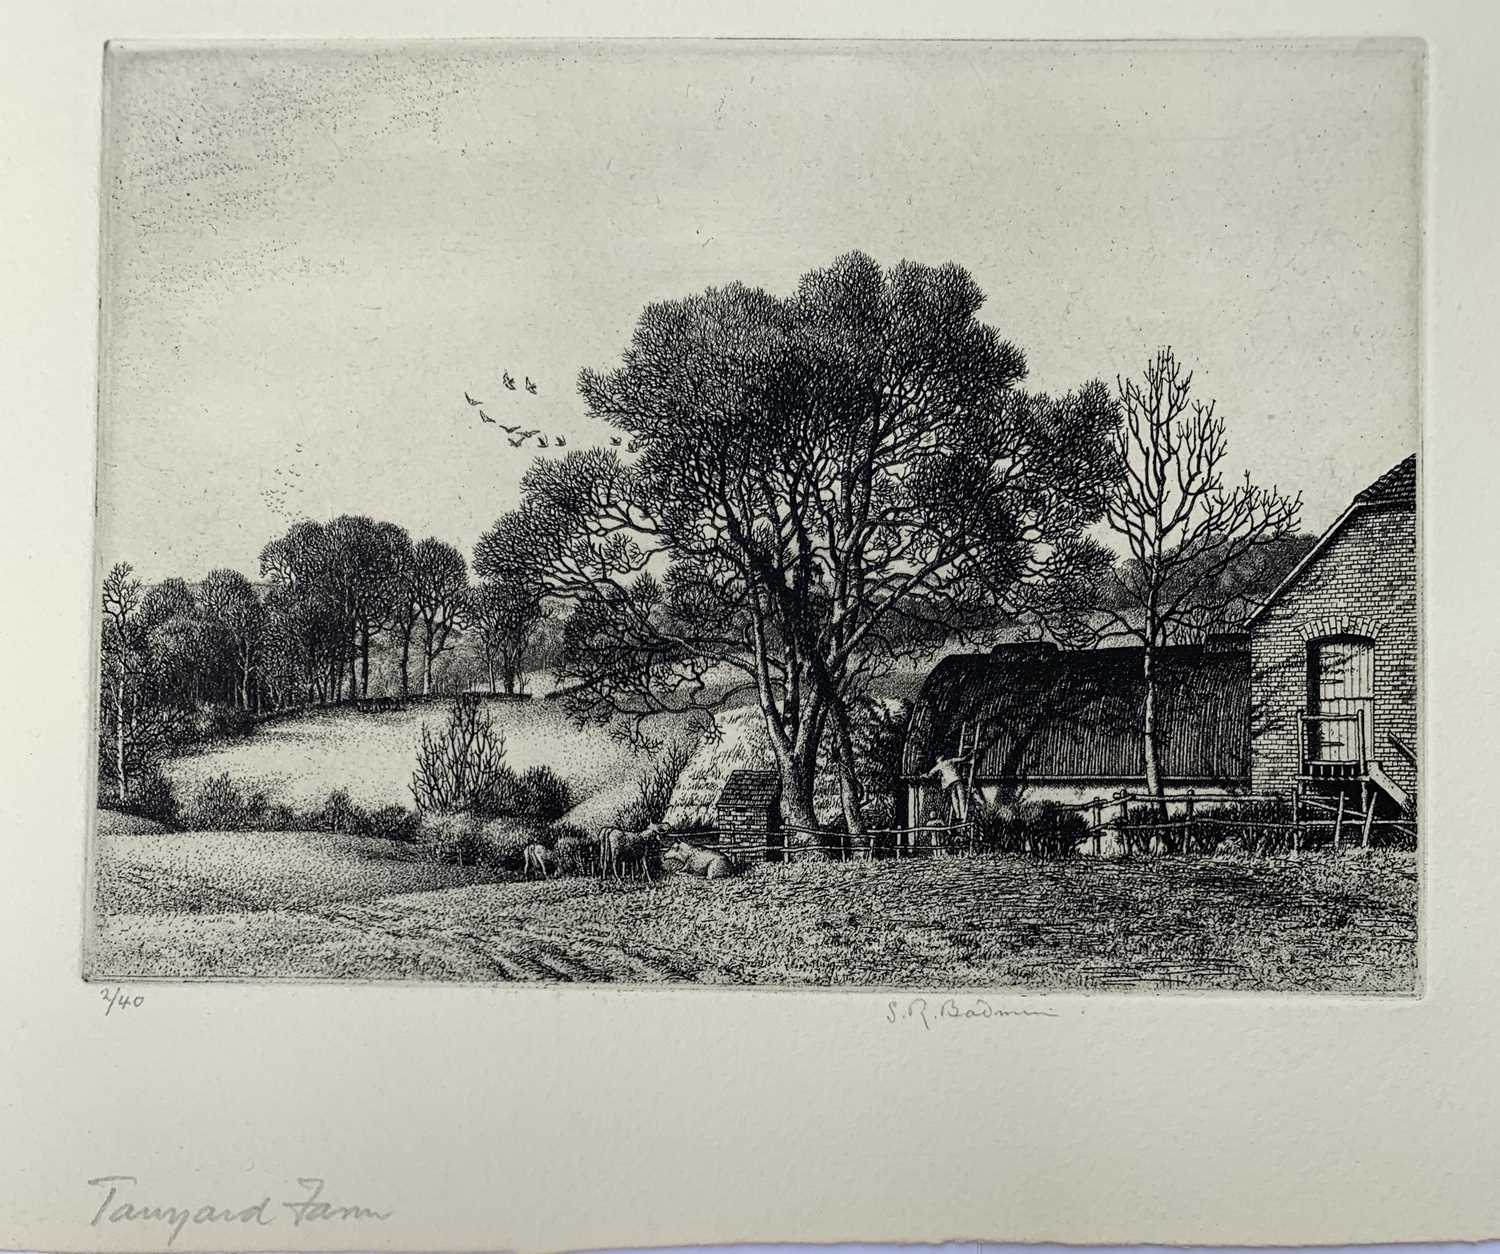 Stanley Roy BADMIN (1906-1989) Tanyard FarmCirca 1929Etching, 2/40 on Creswick paperSigned, numbered - Image 2 of 3